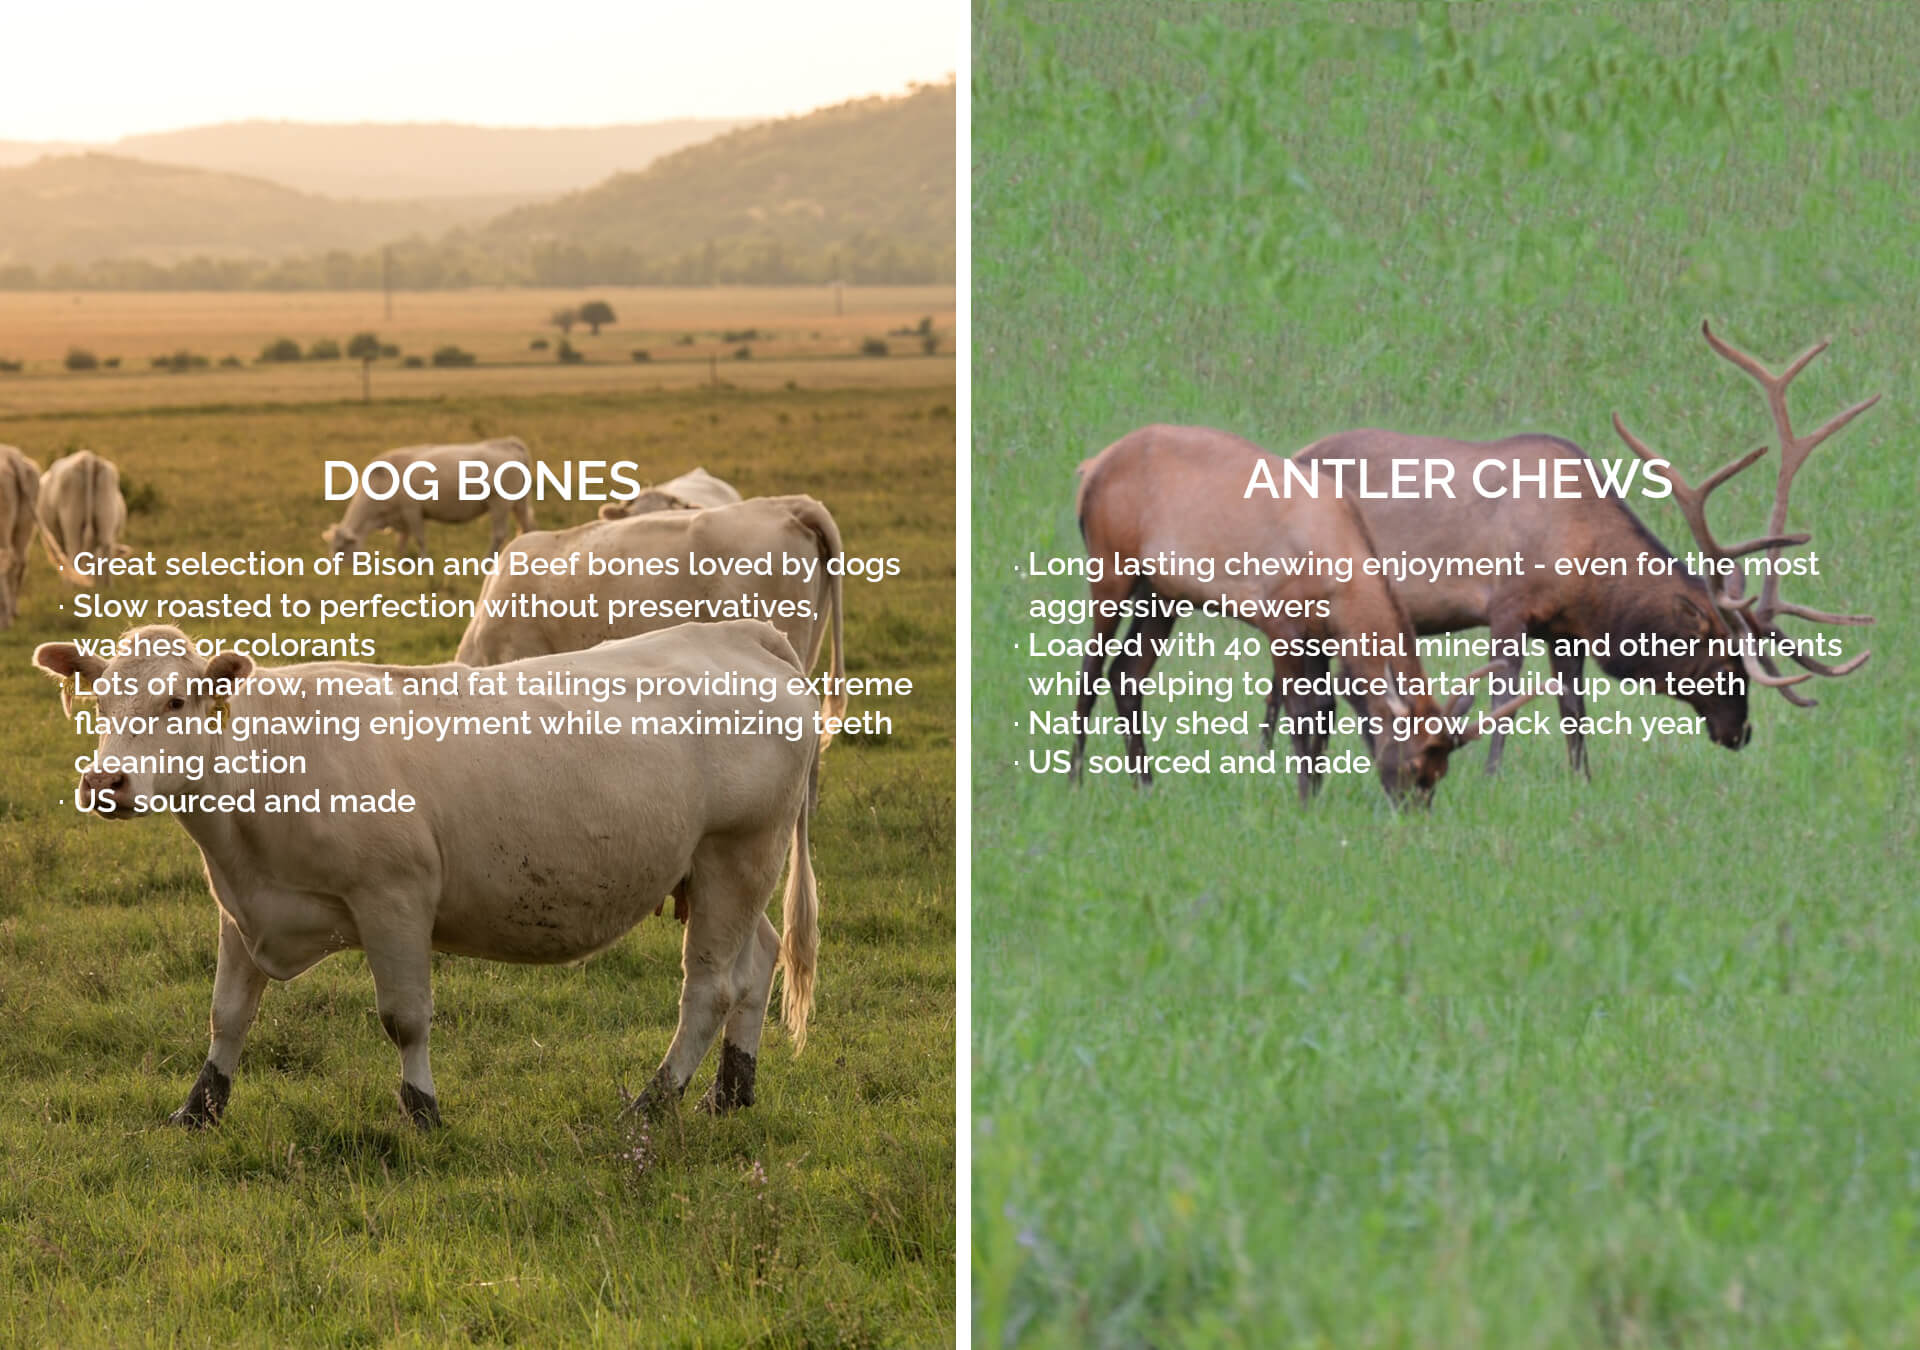 cattle-in-field-image-with-text-dog-bones-and-elk-in-field-image-with-text-antler-dog-chews